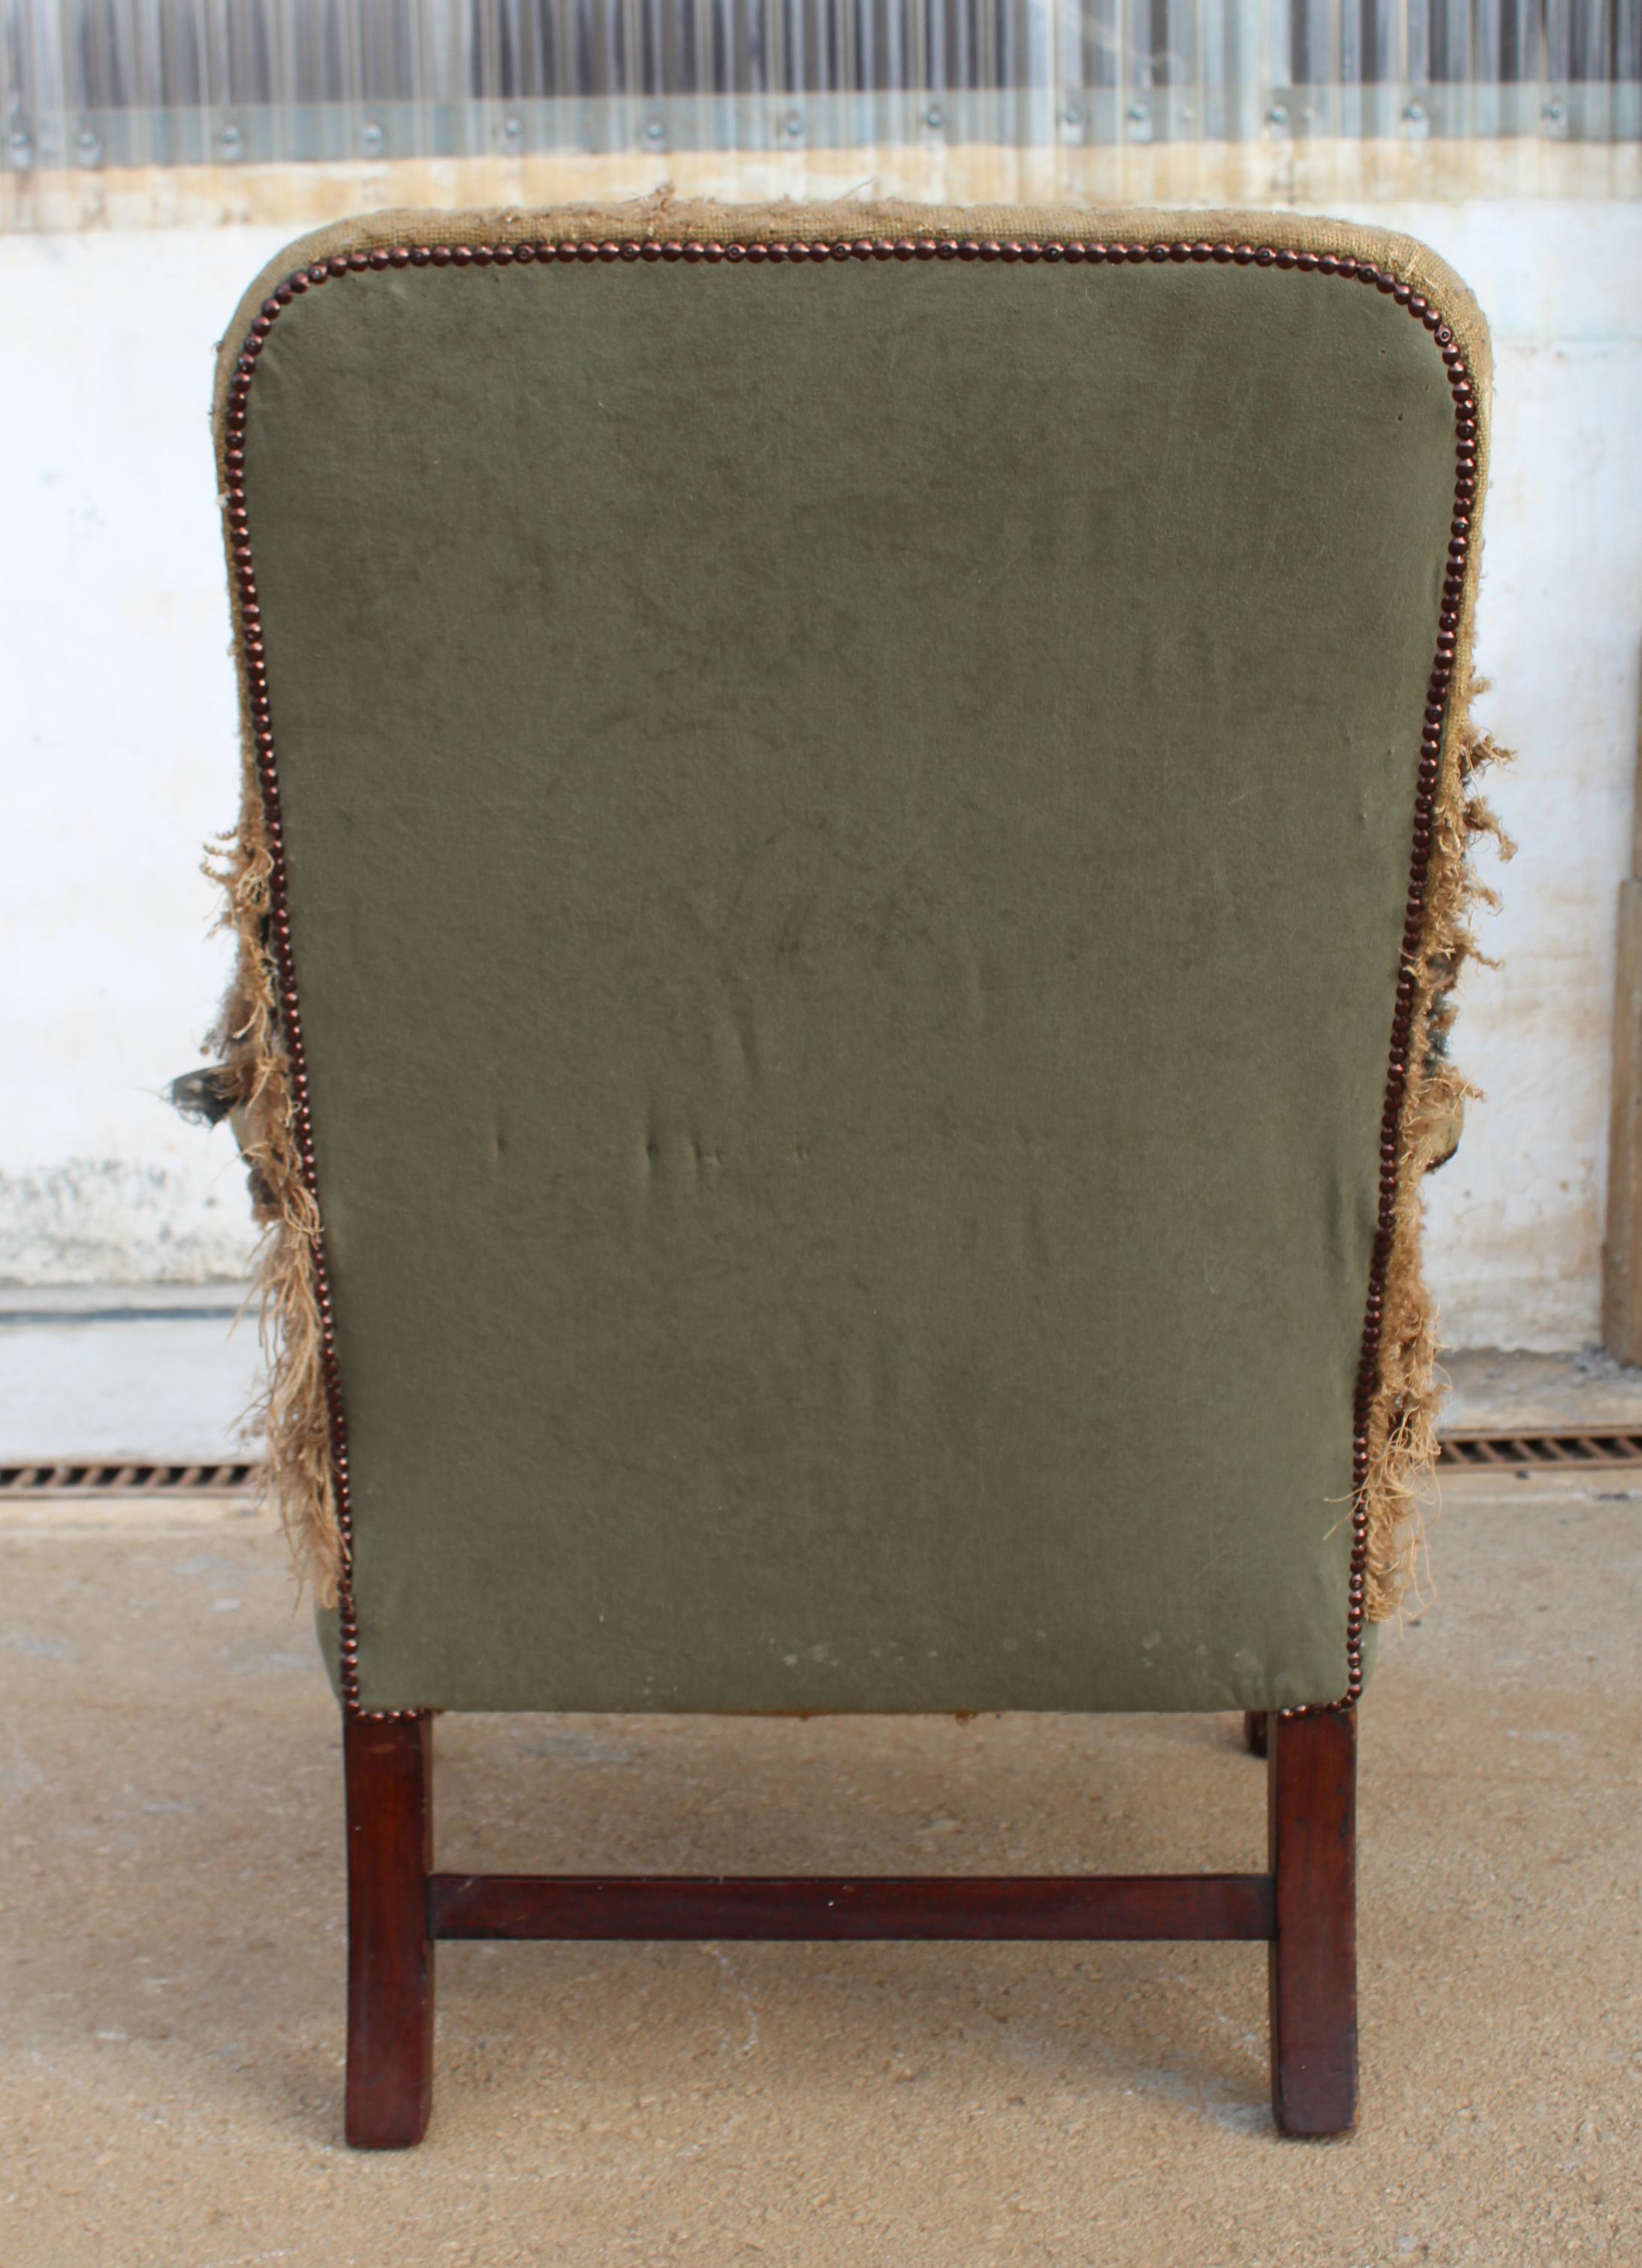 19th Century English Mahogany Armchair with Upholstery That Needs Repair 1